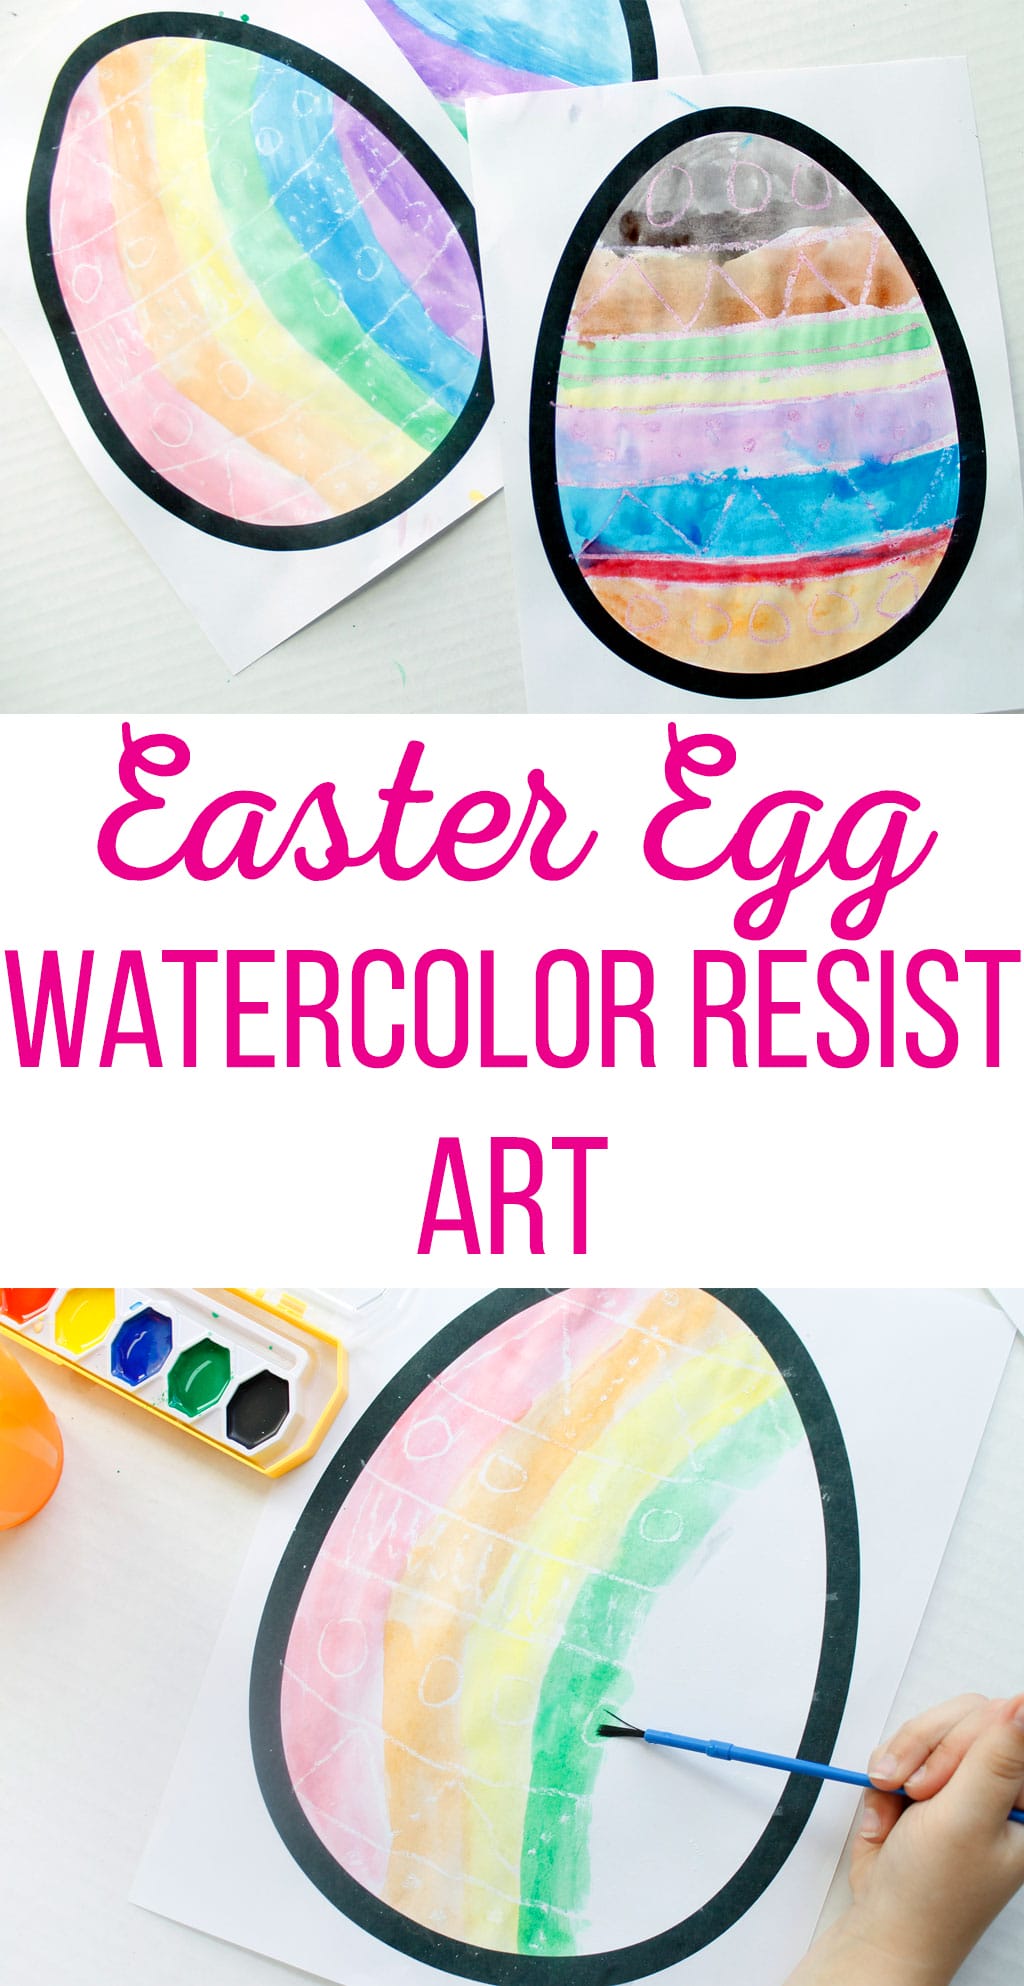 Easter Egg Watercolor Resist Art is a great craft for kids. They will love making designs appear when they use watercolor paints over the crayon.